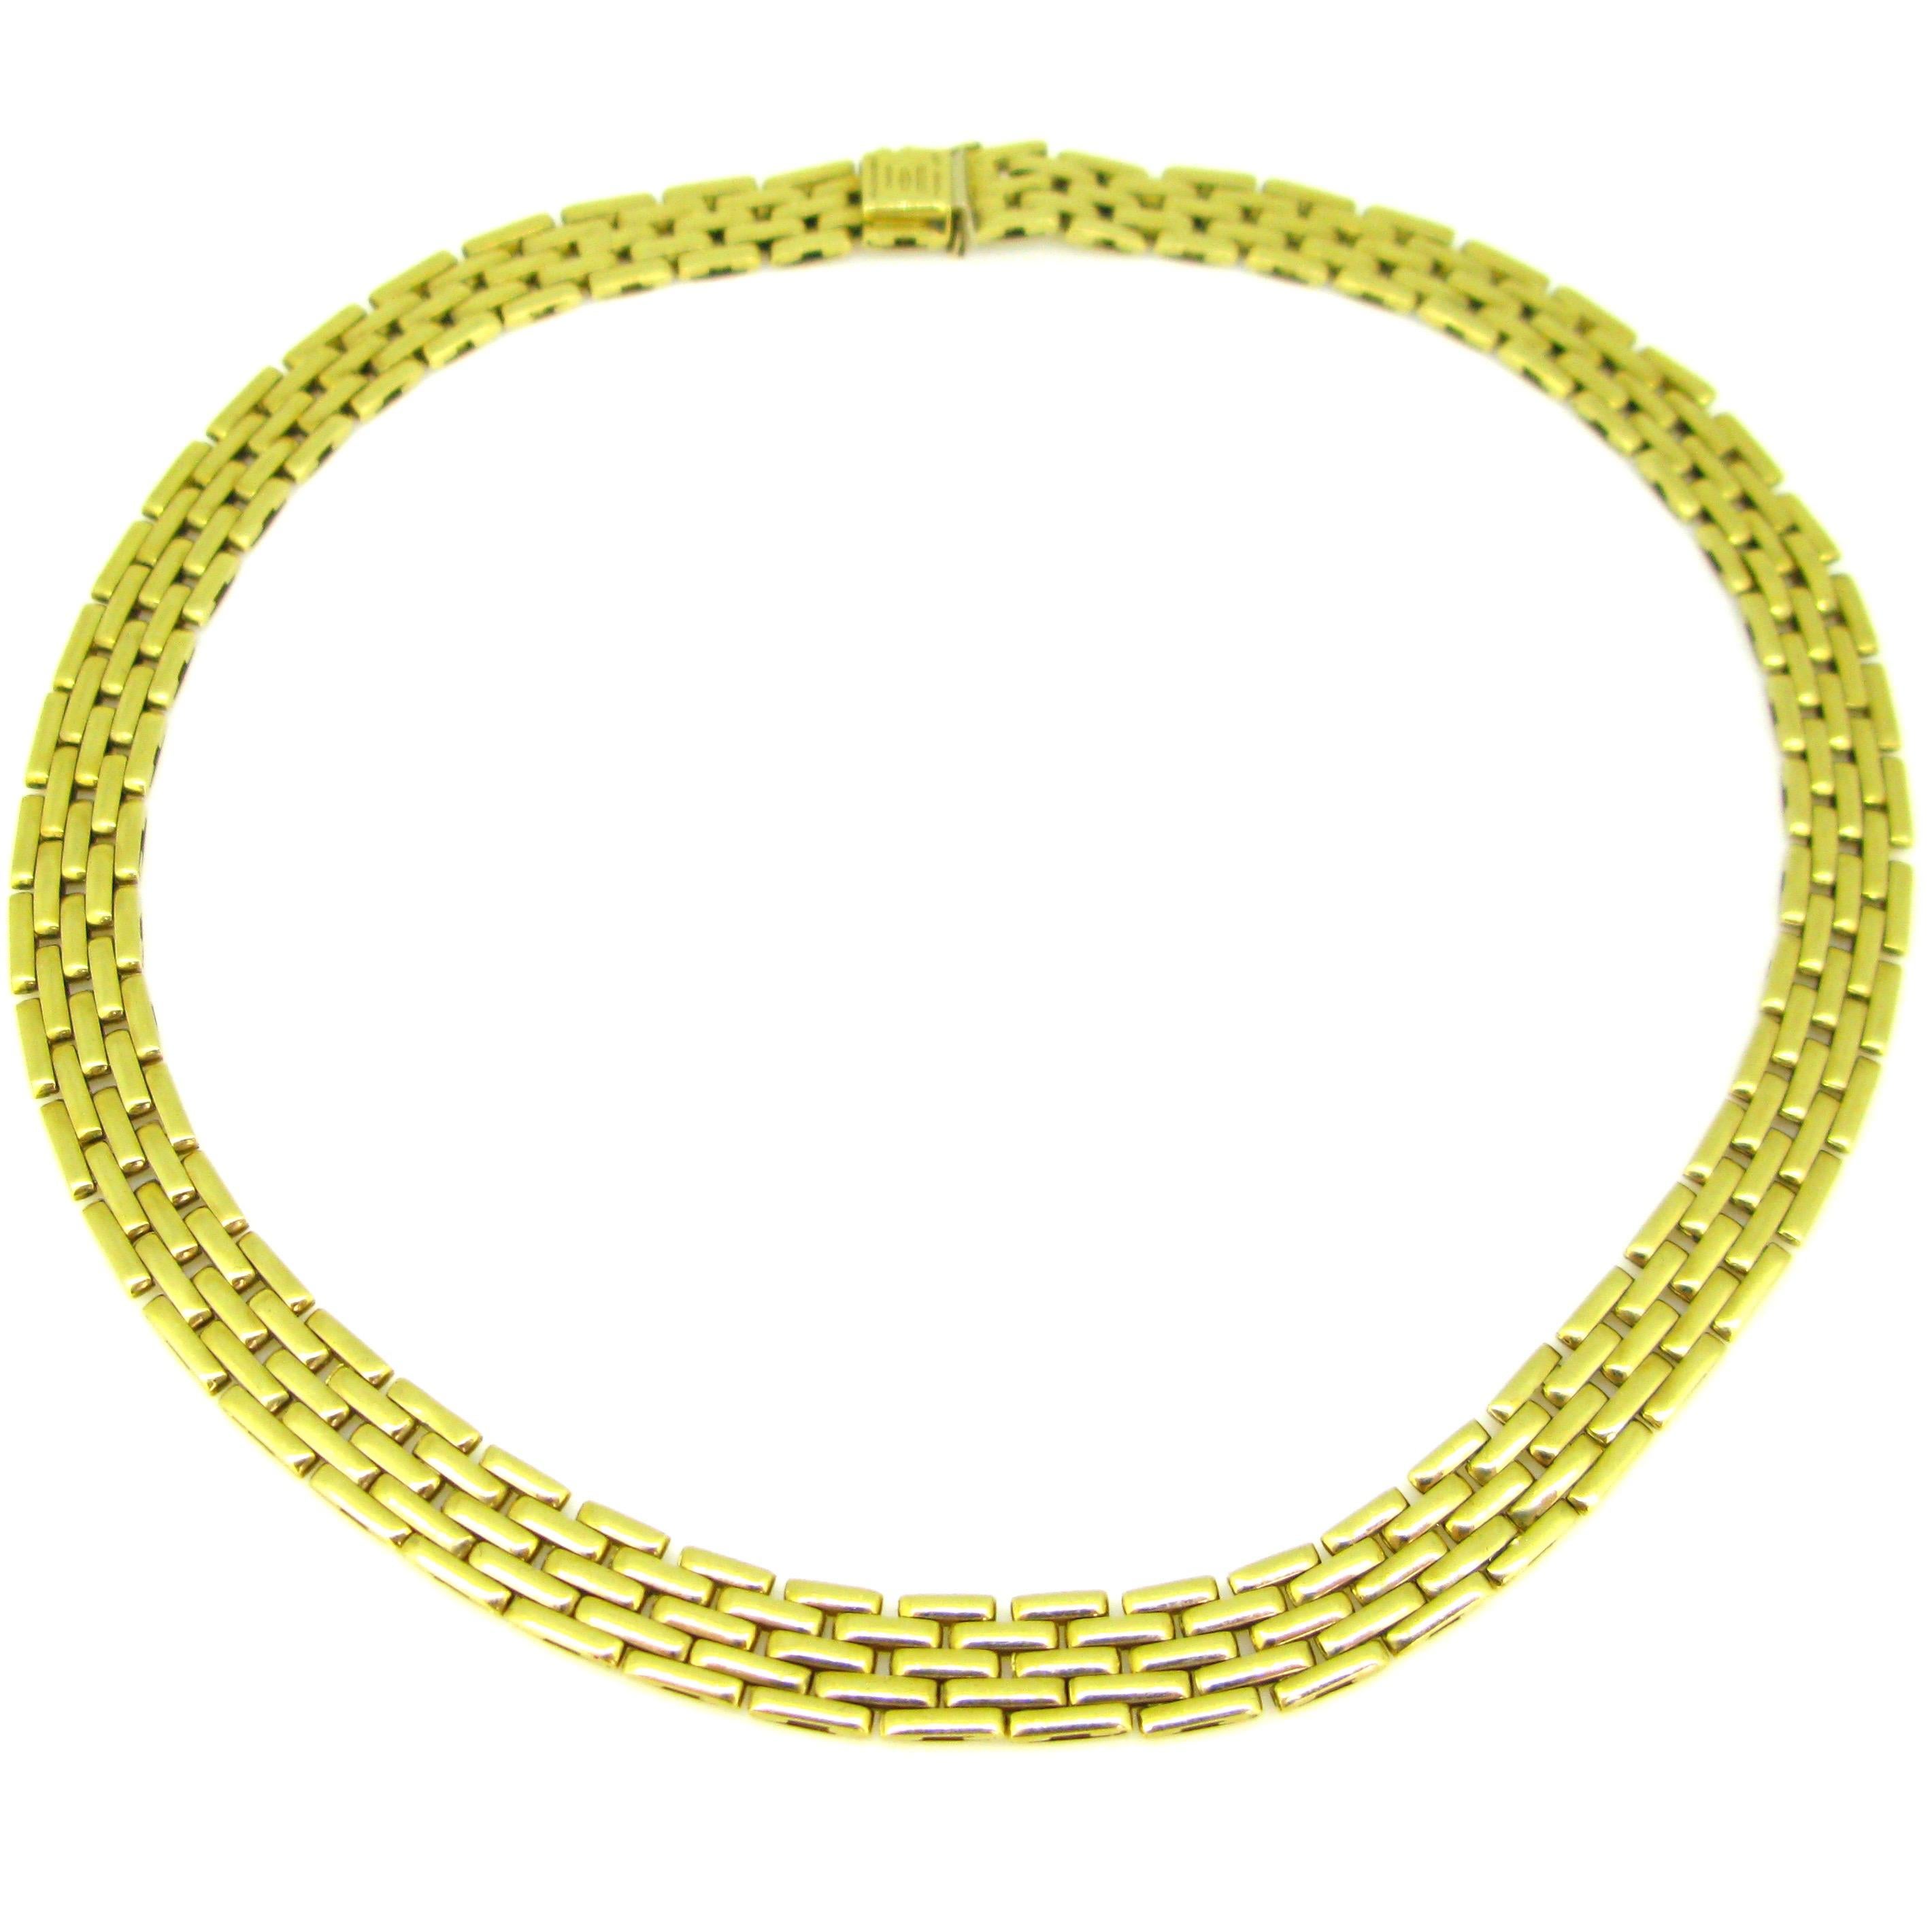 Women's or Men's Mauboussin Yellow Gold Five-Row Link Necklace